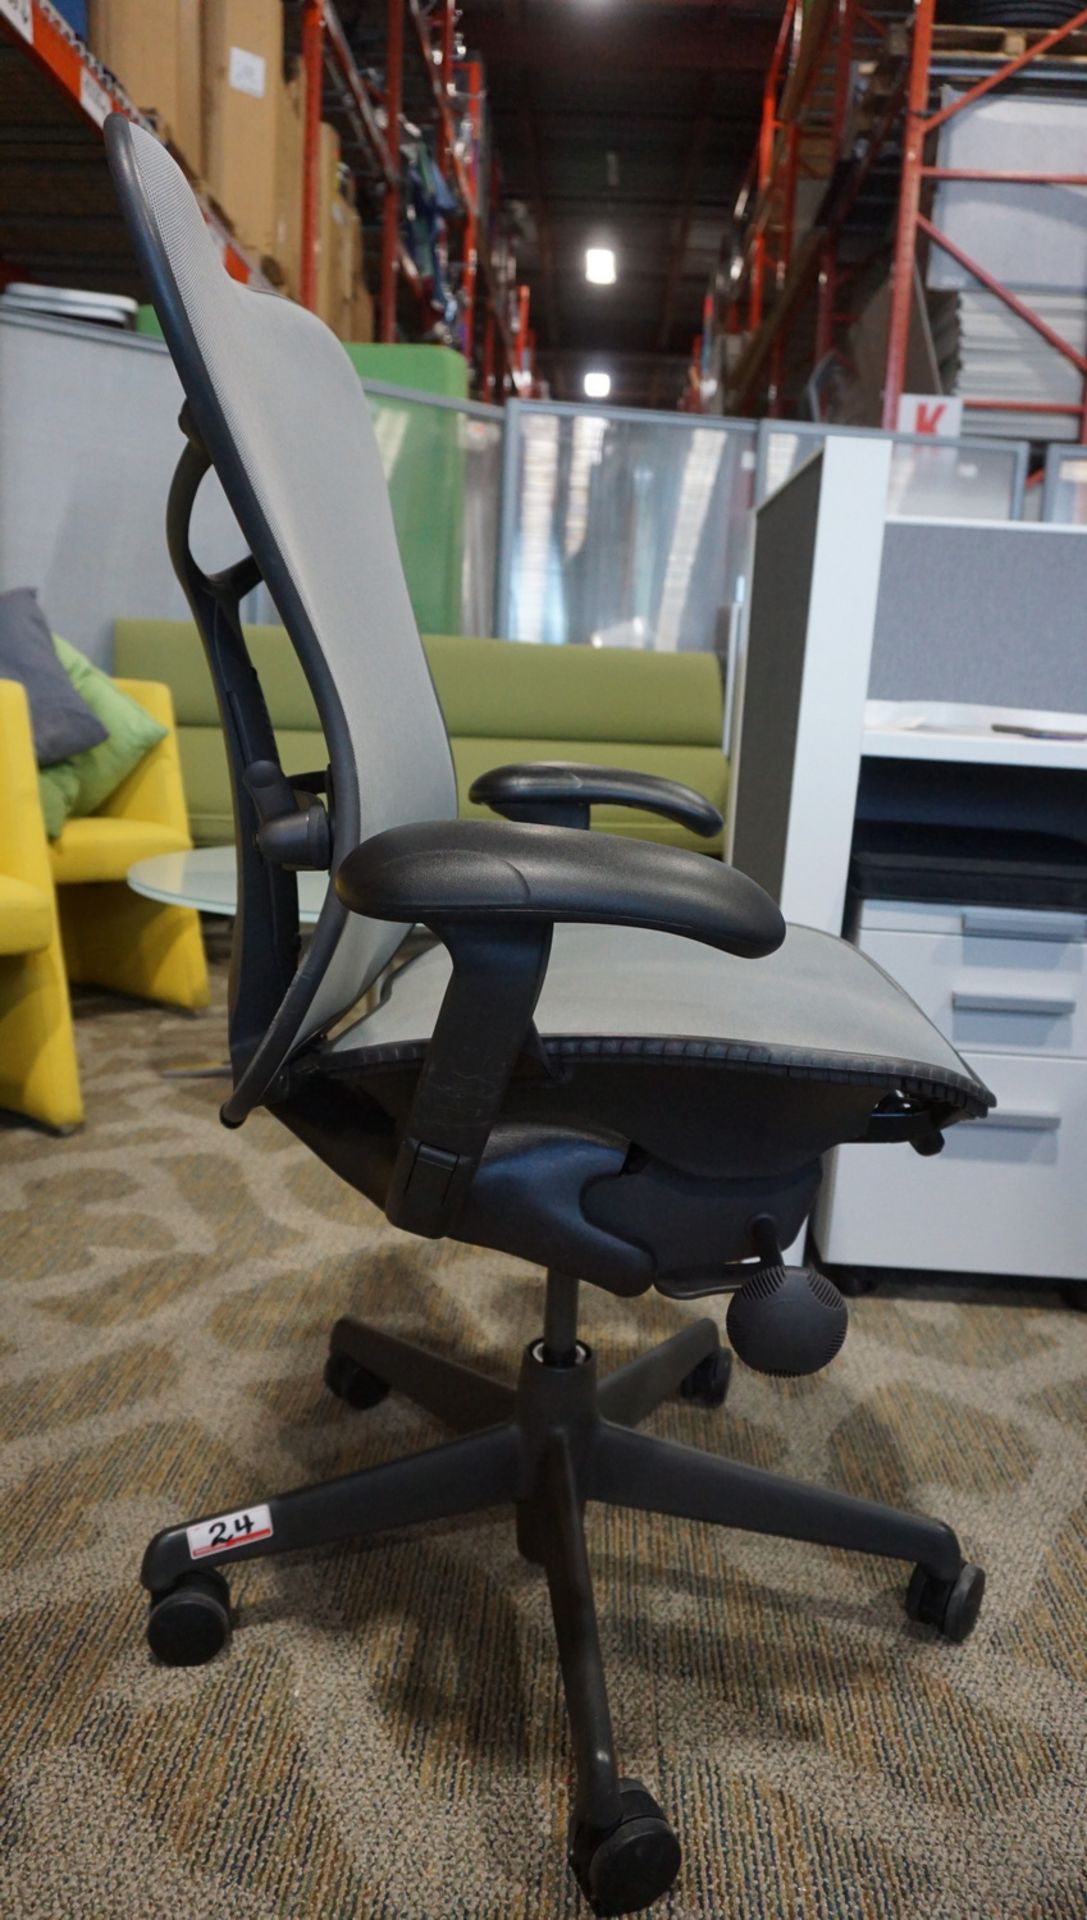 HERMAN MILLER MIRRA 1 OFFICE CHAIR W/ LUMBAR SUPPORT, BACK LOCK, ARM / SEAT ADJUSTMENTS - Image 2 of 5